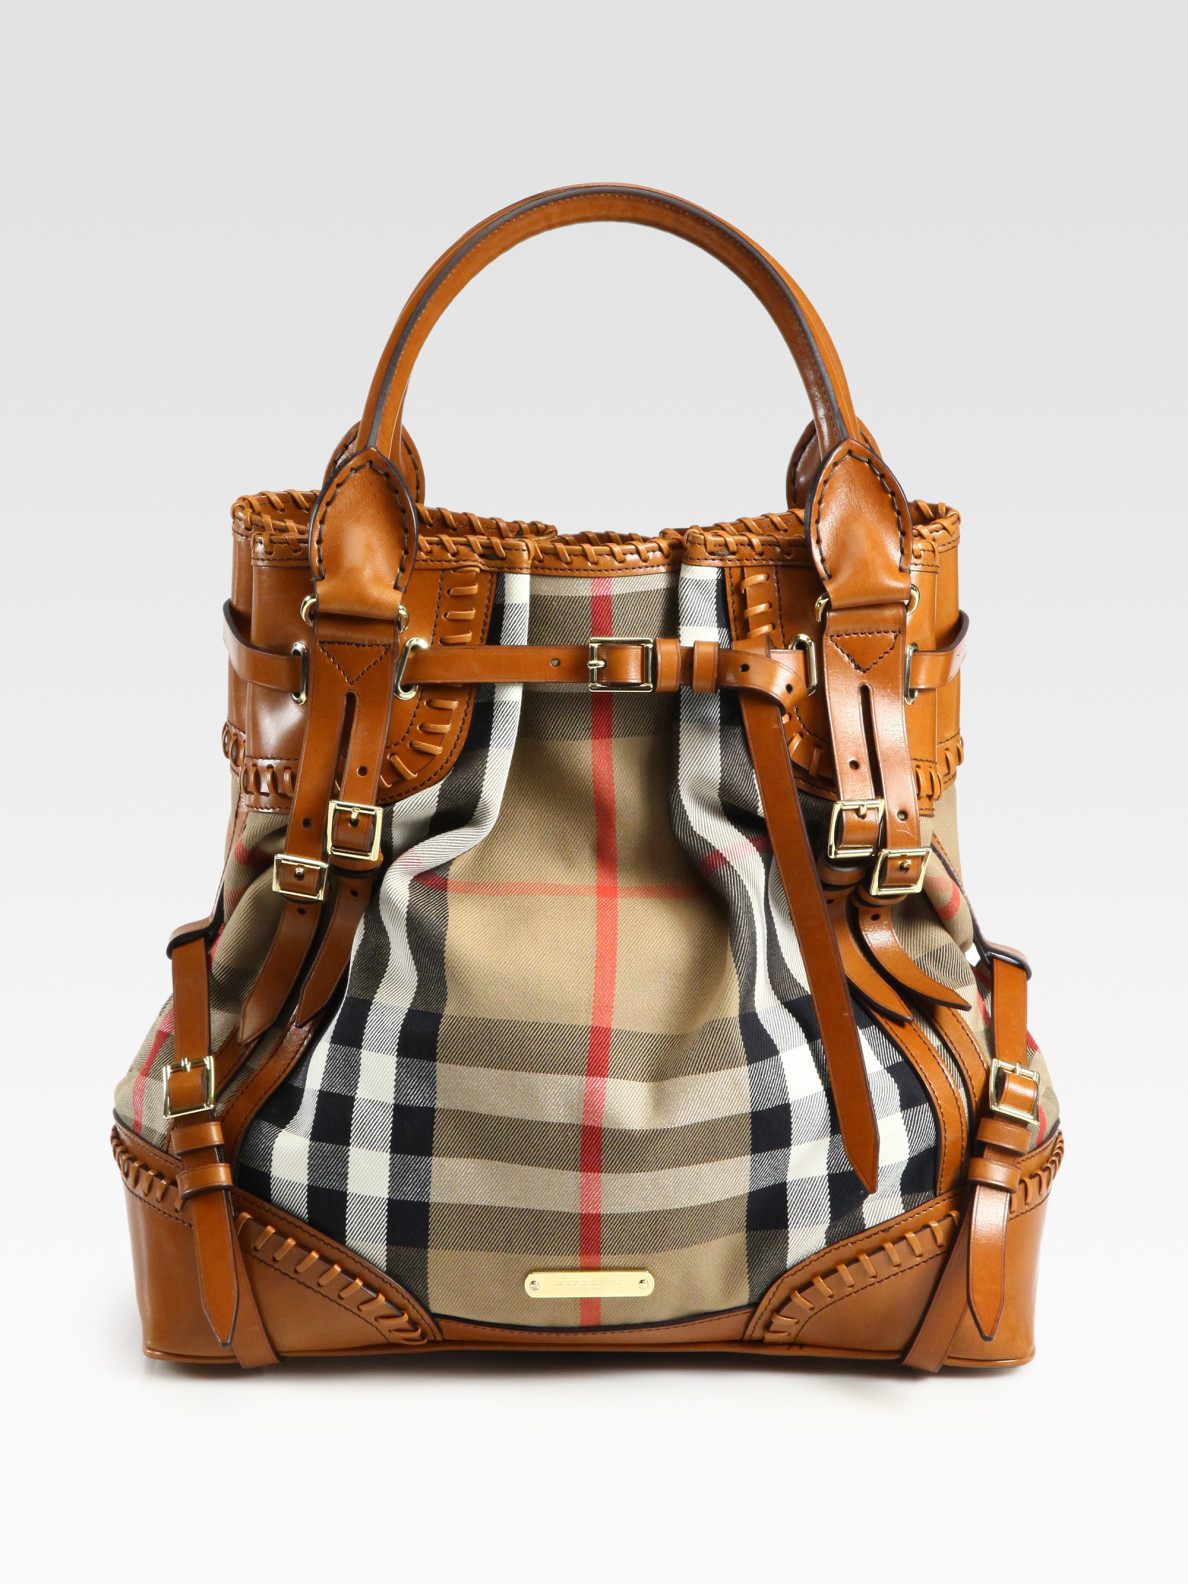 Lyst - Burberry prorsum Whipstitch Leather & Check Canvas Tote Bag in Brown